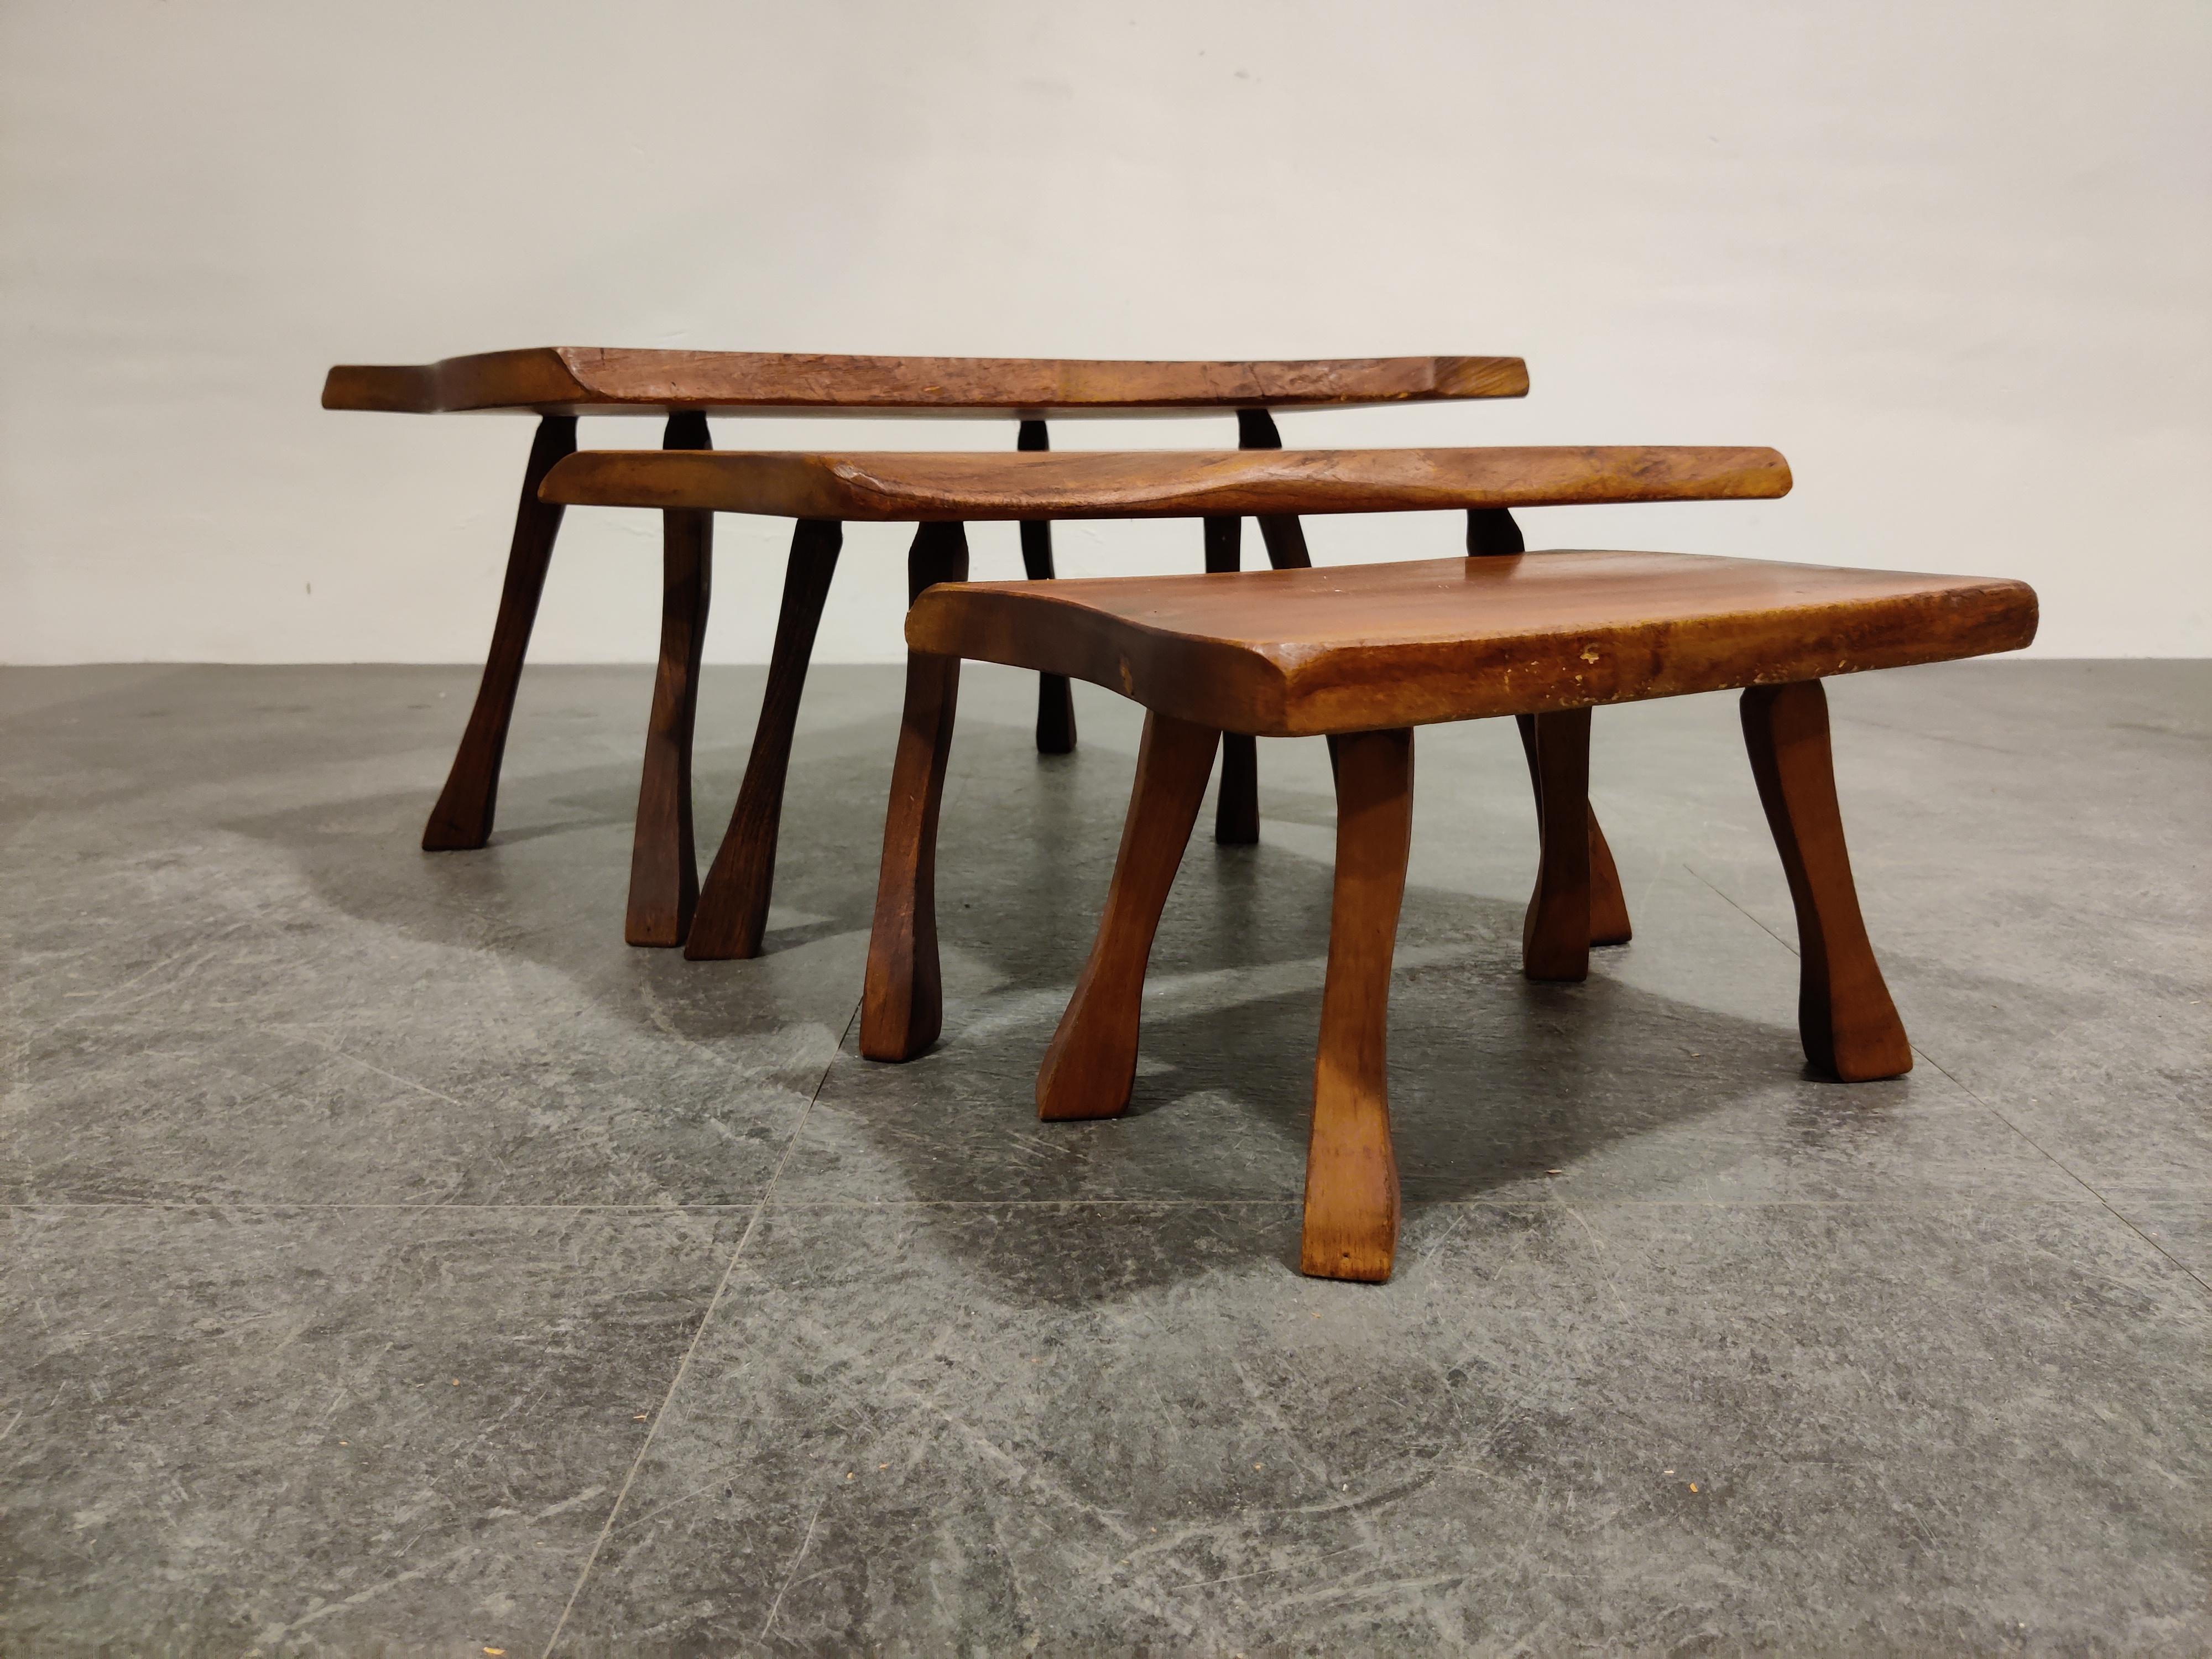 Lovely set of unusual brutalist nesting tables.

SImple and robuste design.

1960s - Belgium

Good condition

Dimensions of the largest table:

Height 29cm/11.41